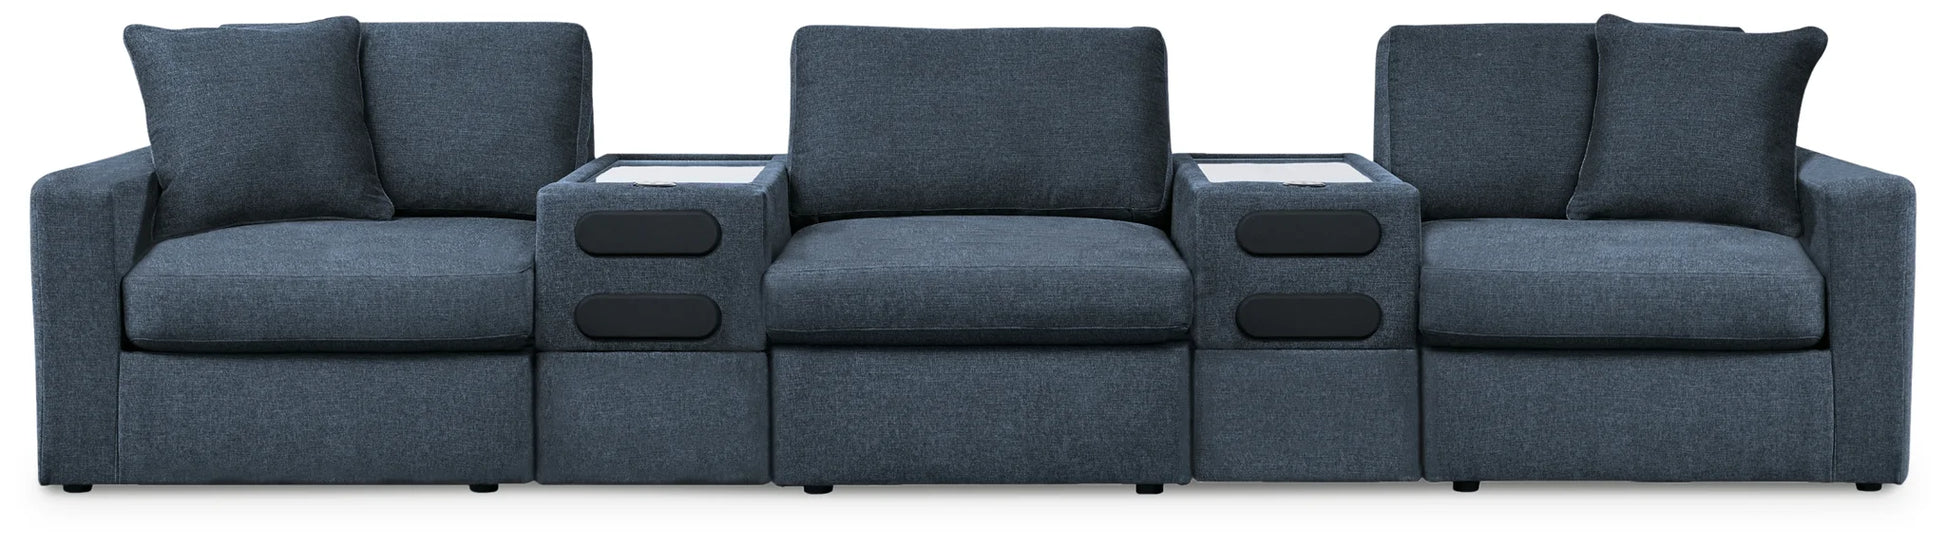 Modmax - Ink - 5-Piece Sectional With 2 Audio System Consoles